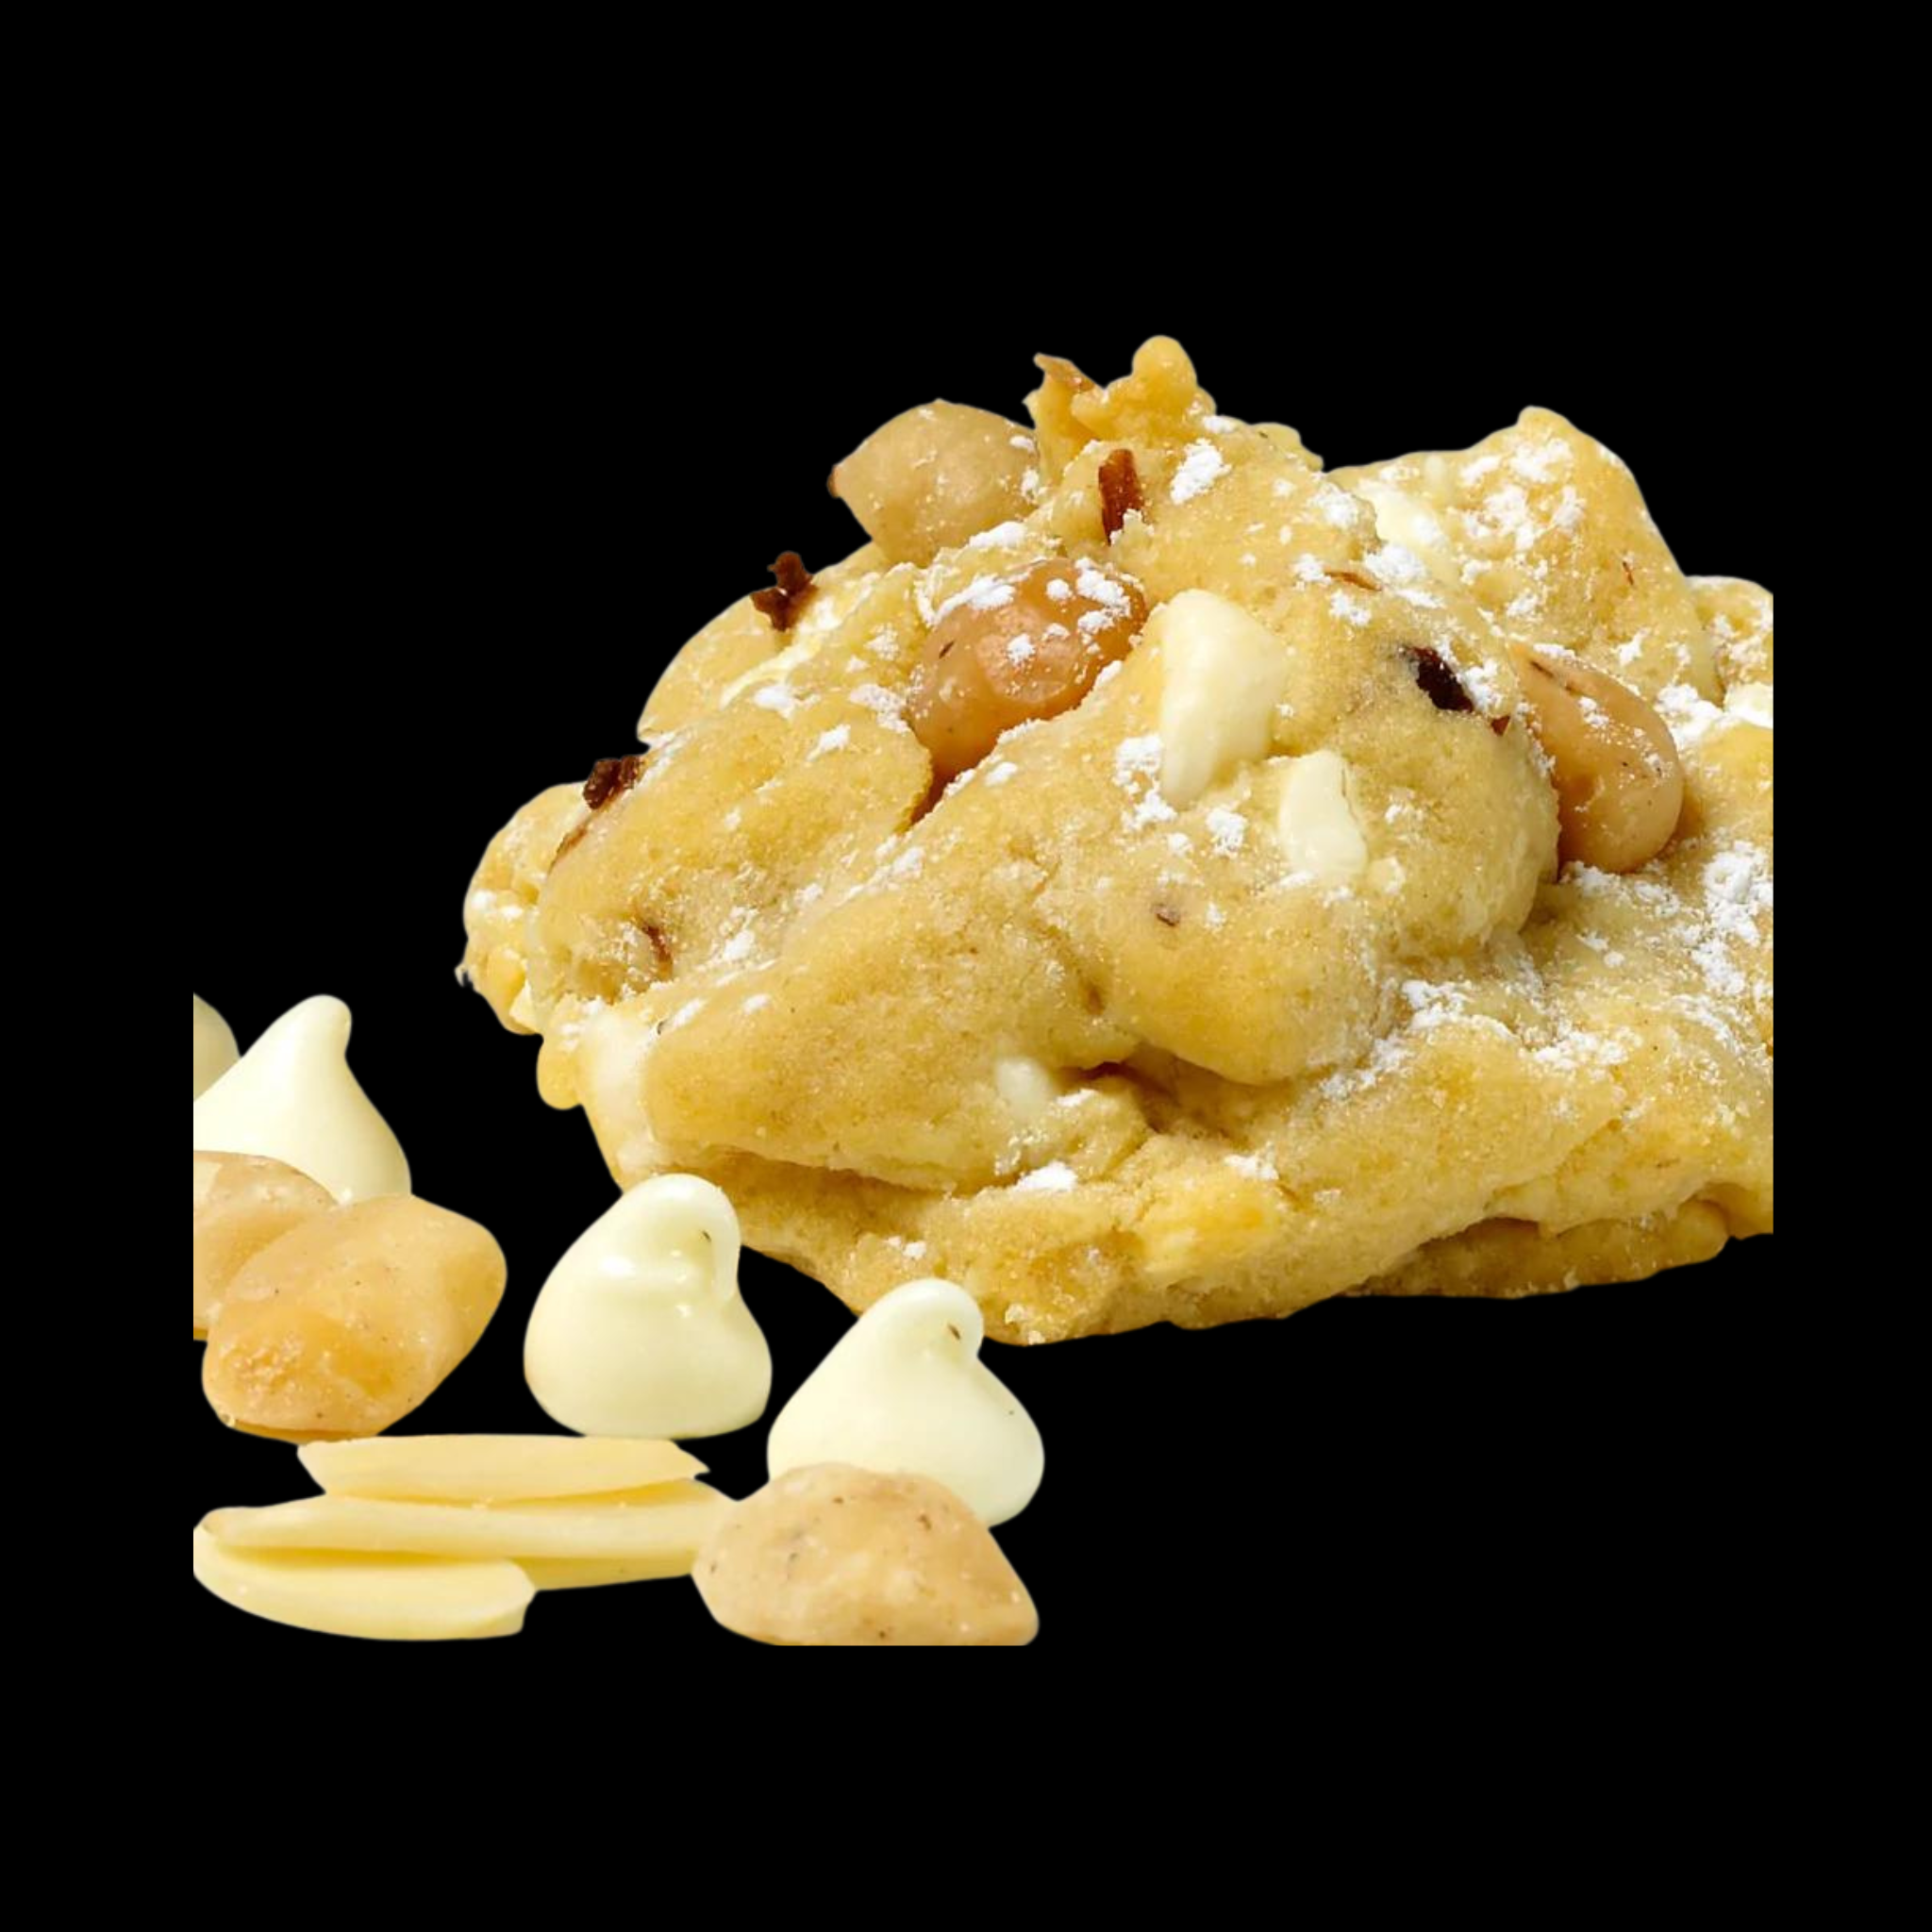 Our gourmet, handcrafted White Chocolate Almond Macadamia cookie. | Monica's Gourmet Cookies